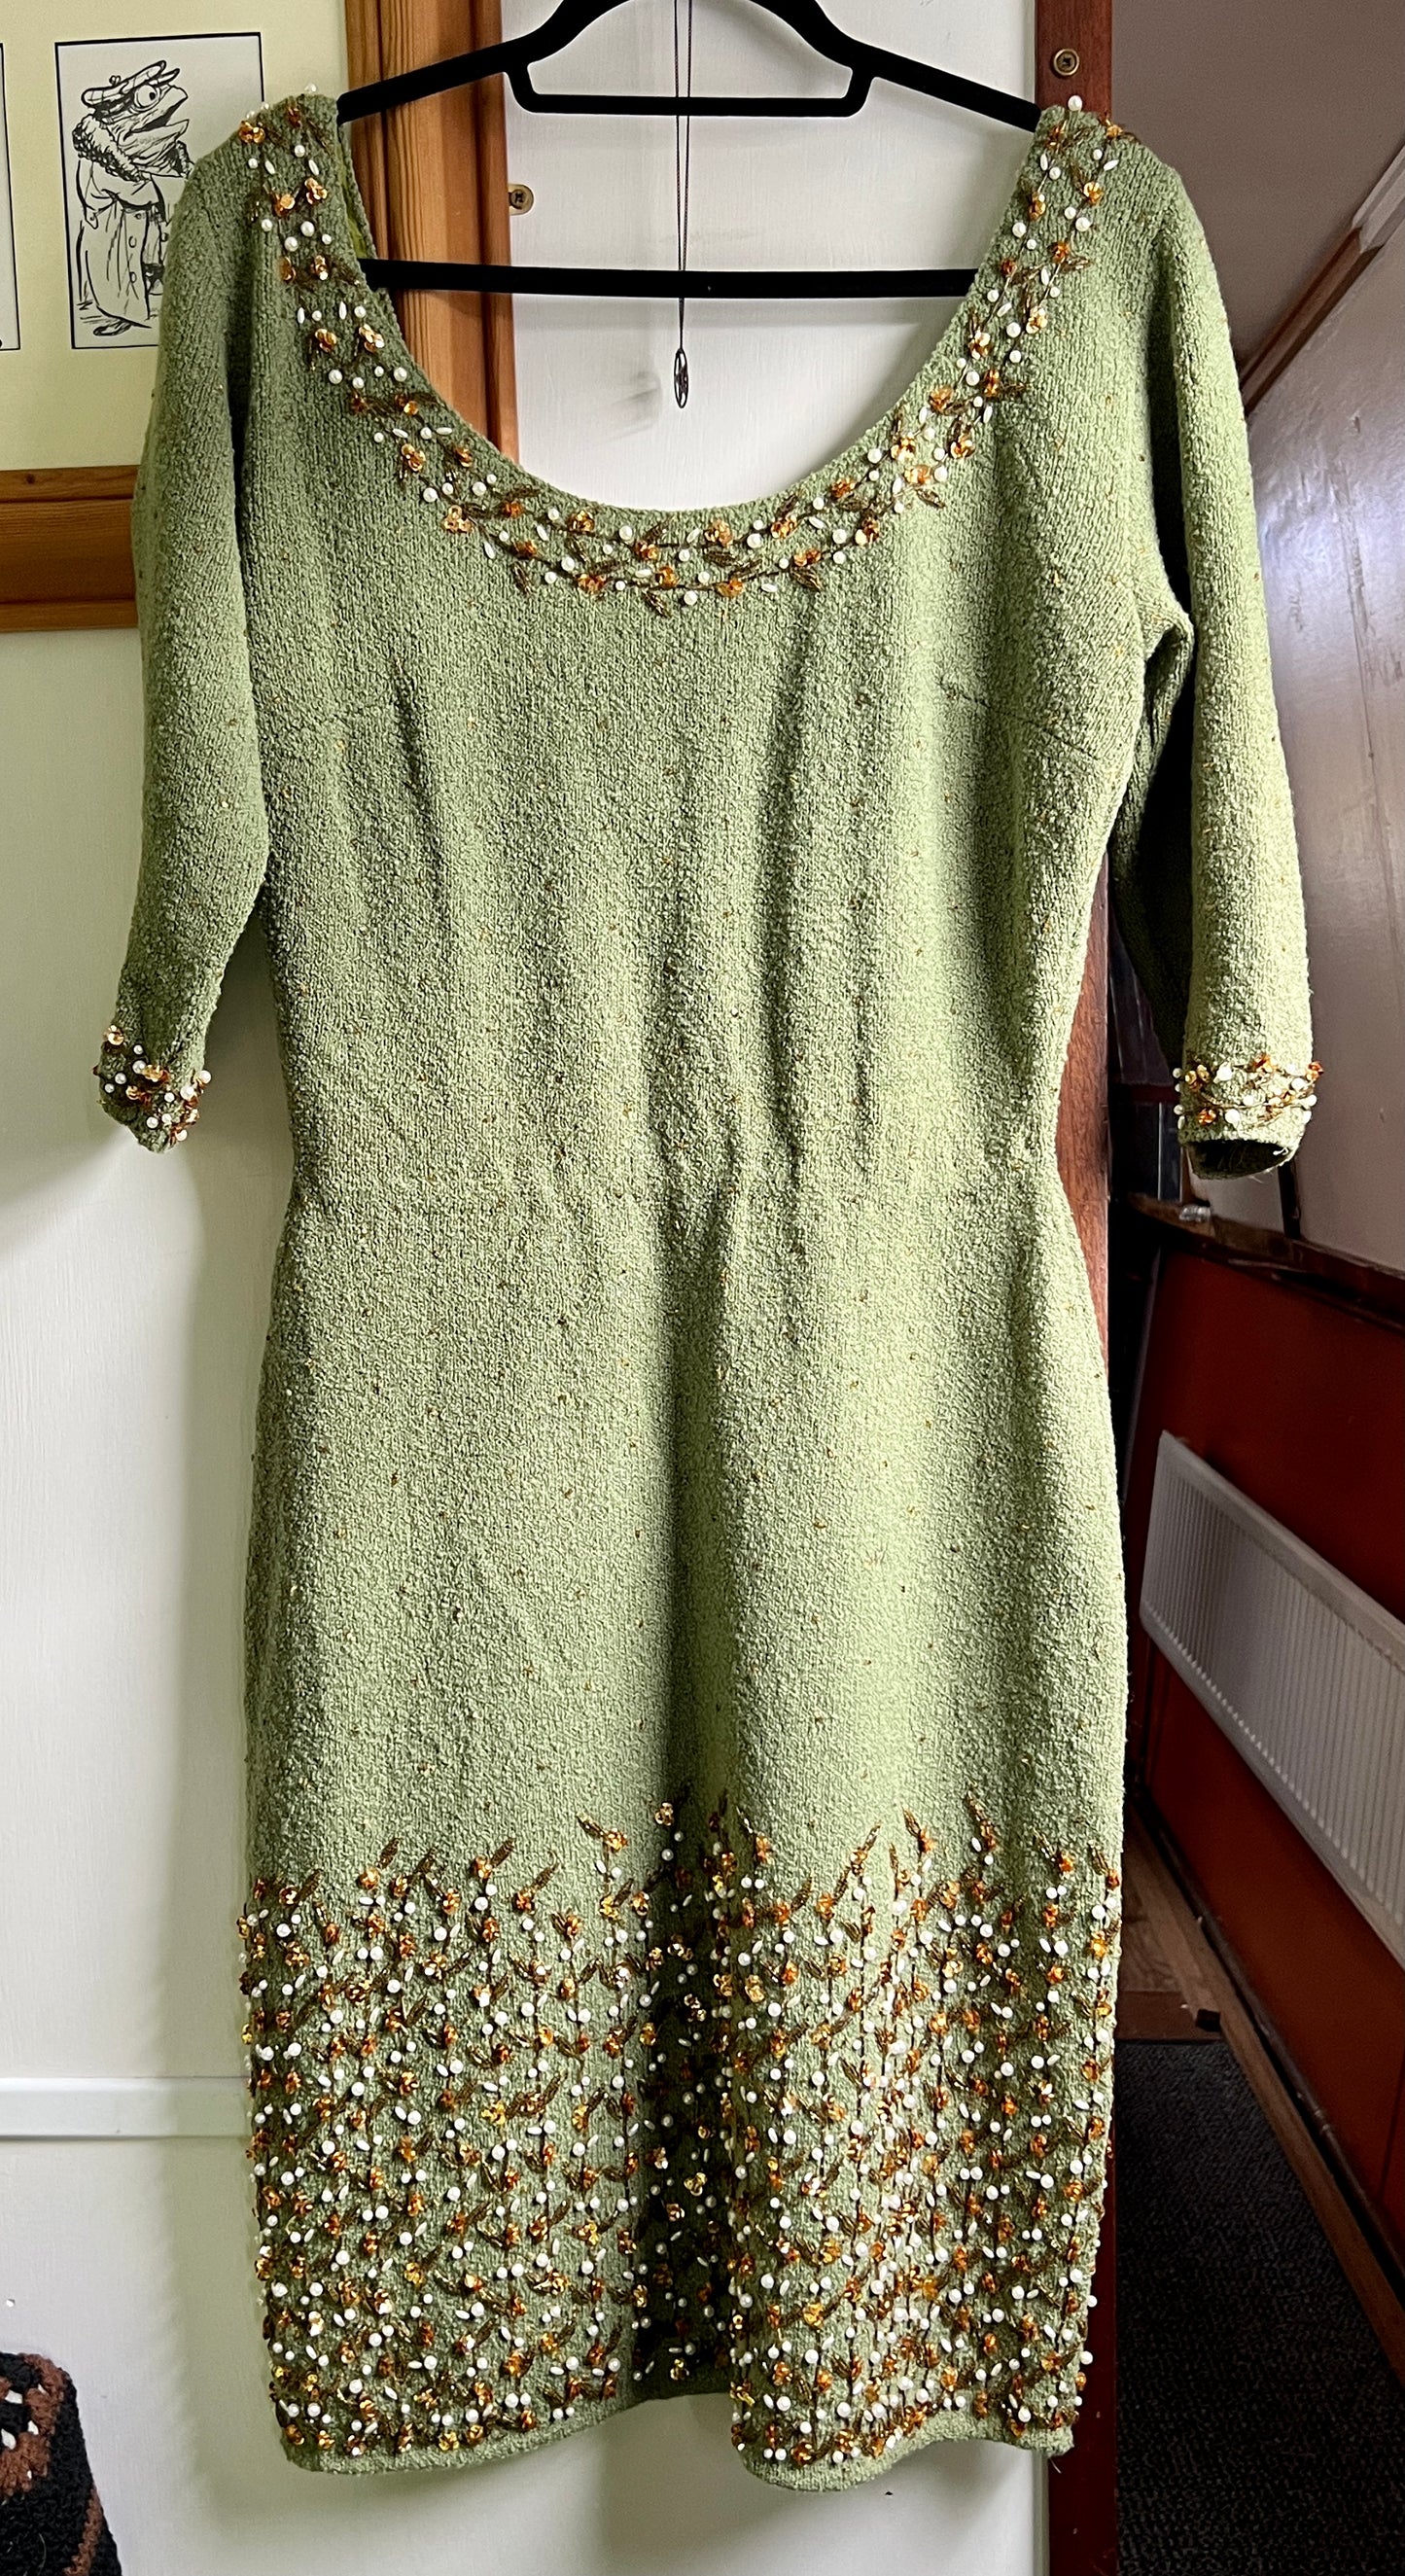 Vintage 1950s 1960s Gene Shelly green wool dress with gold sequins and beads and pearls Rare XXL plus size